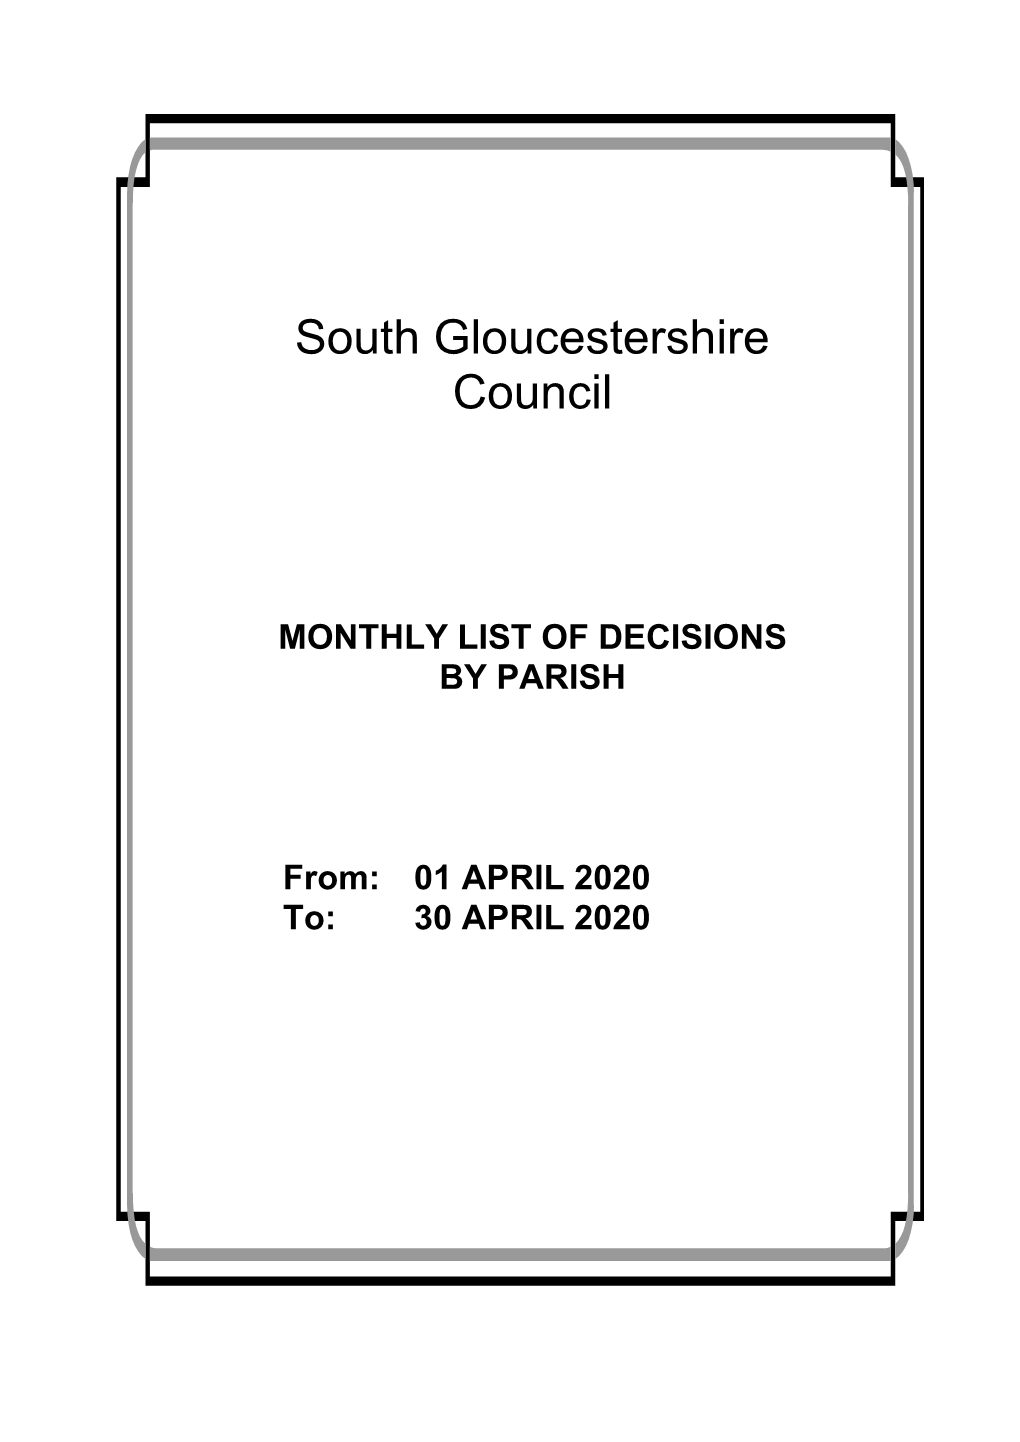 MONTHLY LIST of DECISIONS by PARISH From: 01 APRIL 2020 To